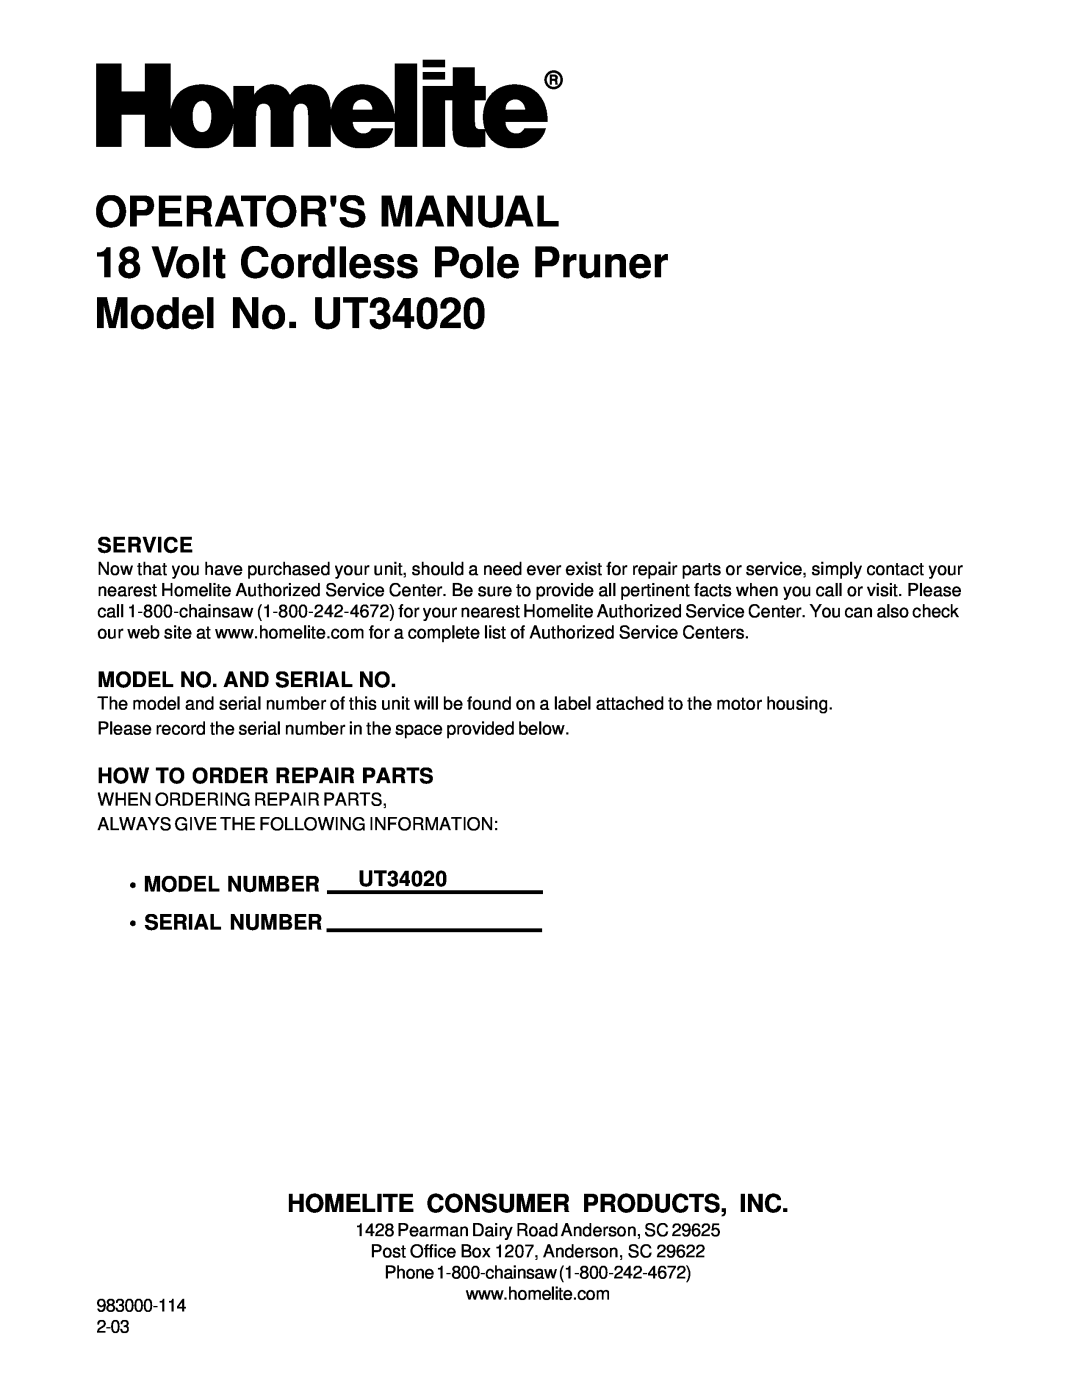 Homelite UT34020 manual Homelite Consumer Products, Inc, Service, Model No. And Serial No, How To Order Repair Parts 